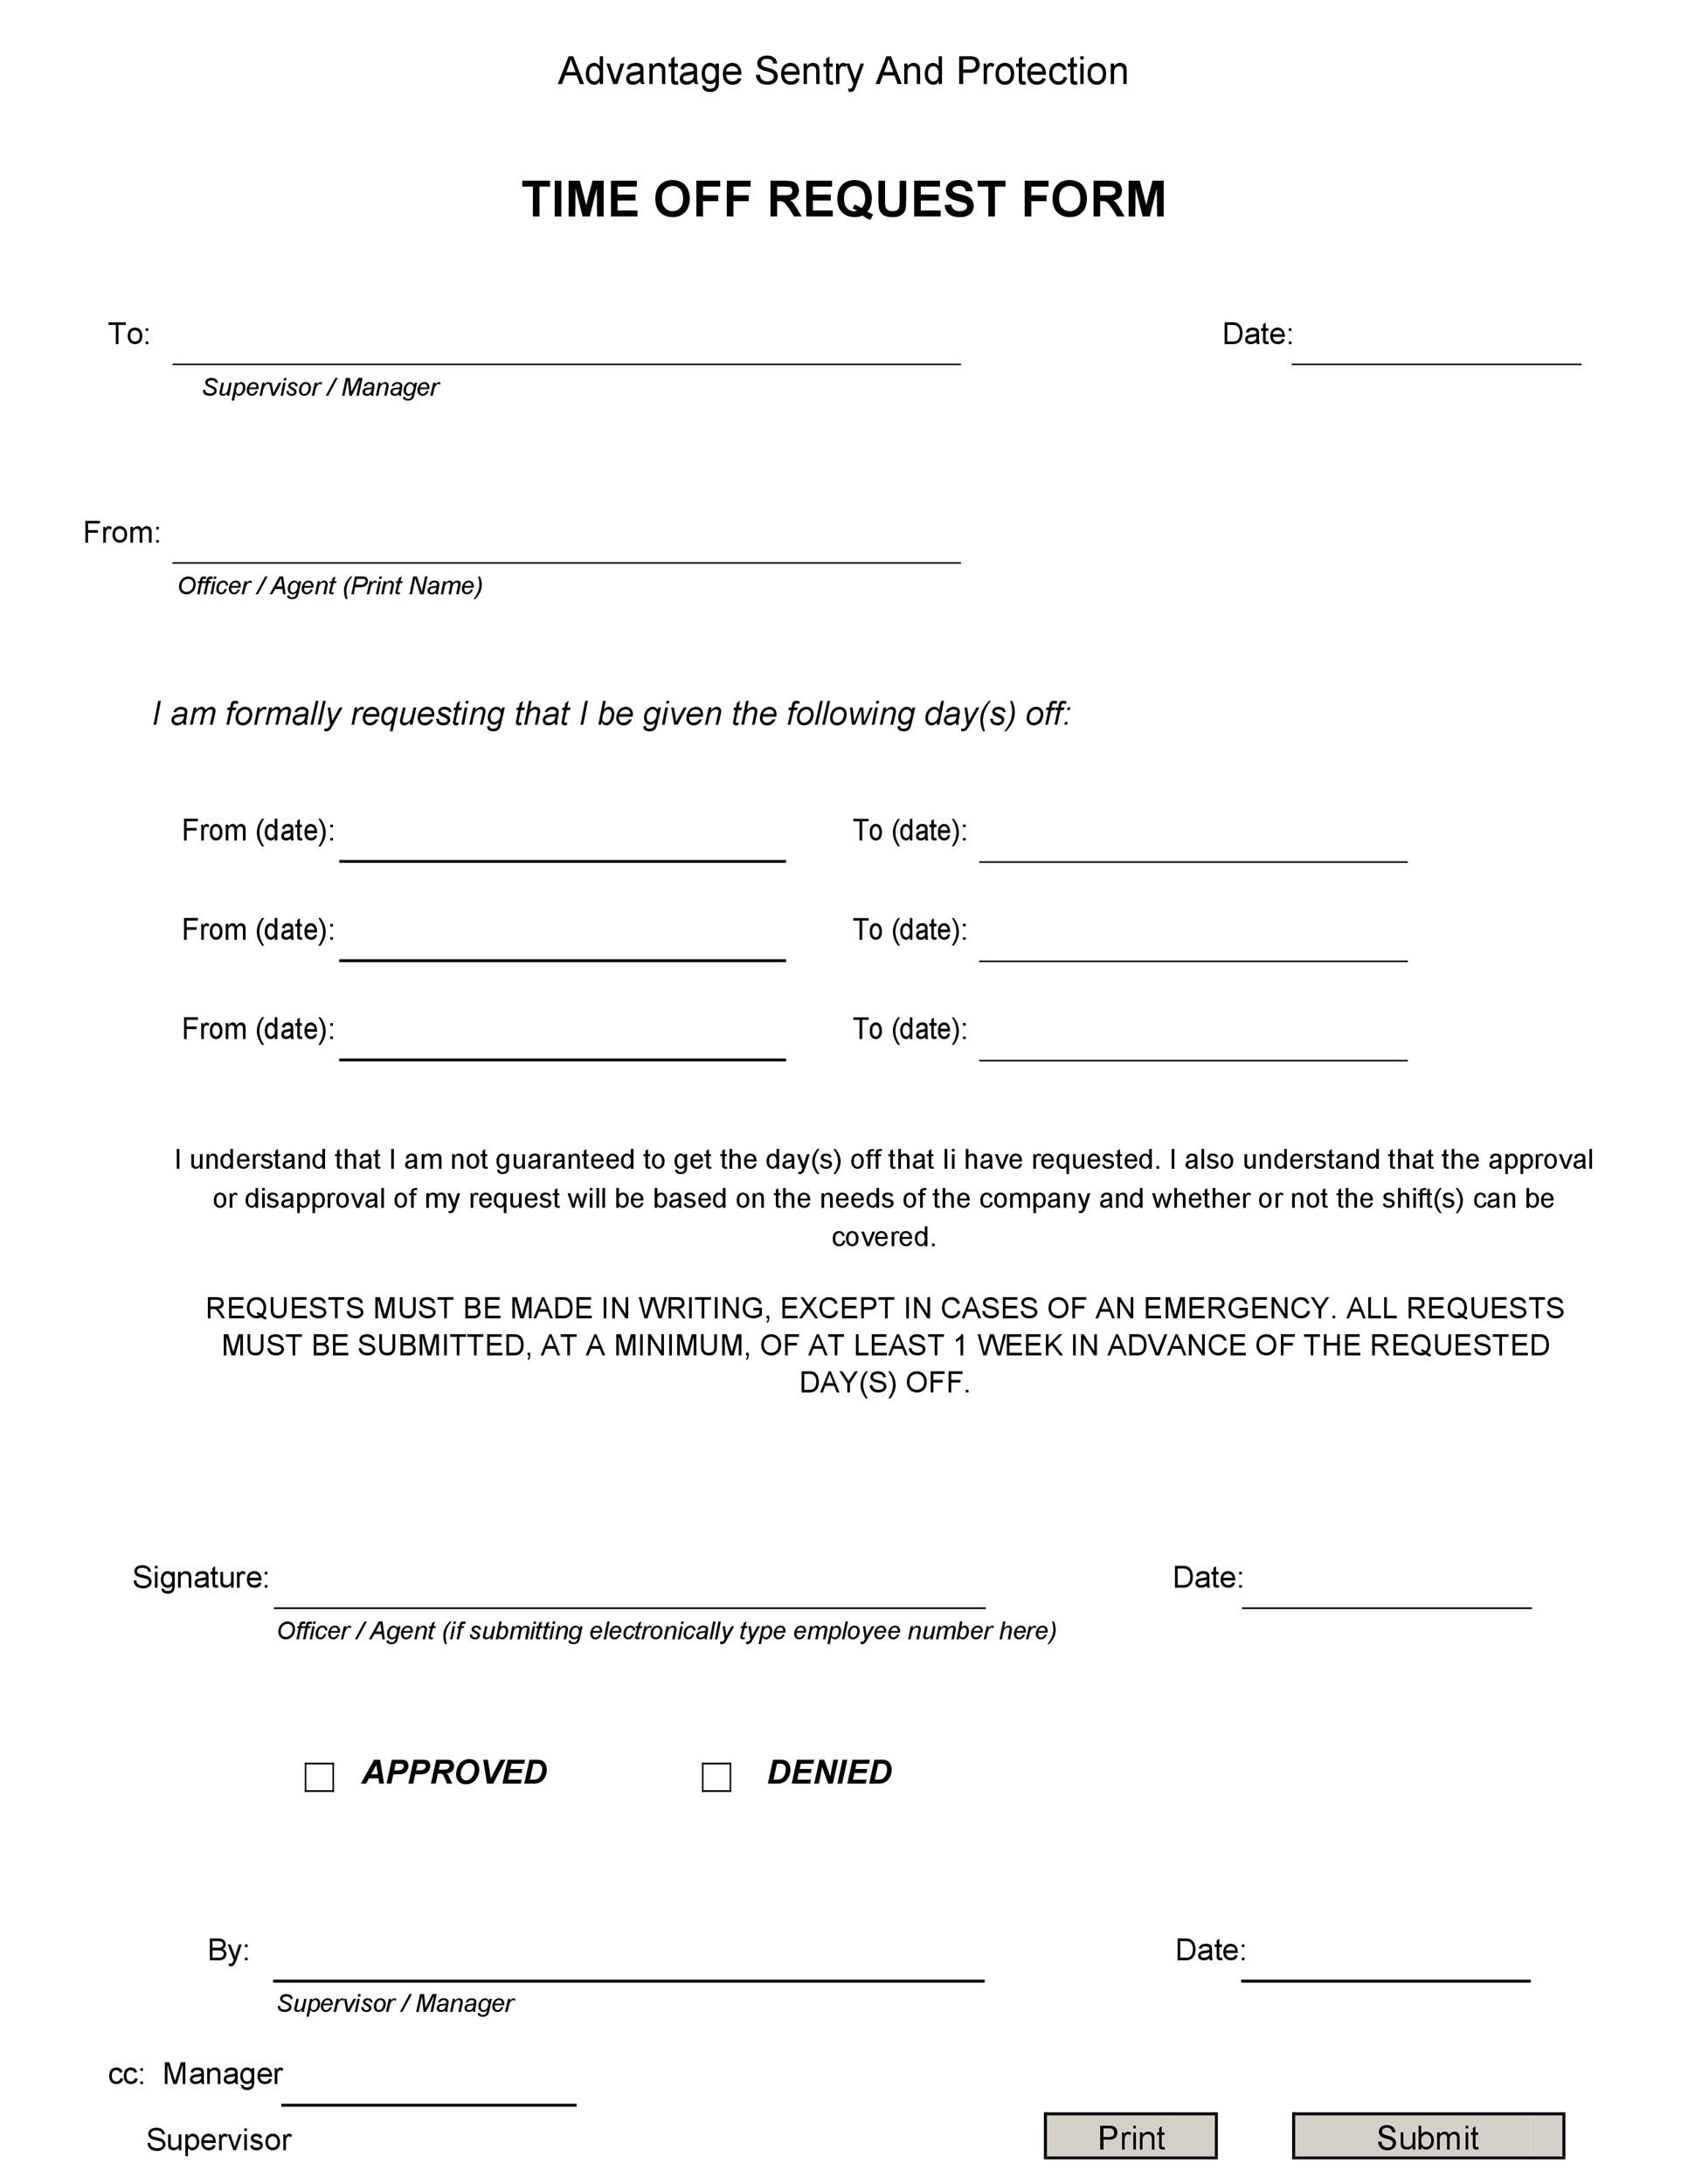 40+ Effective Time Off Request Forms & Templates Template Lab